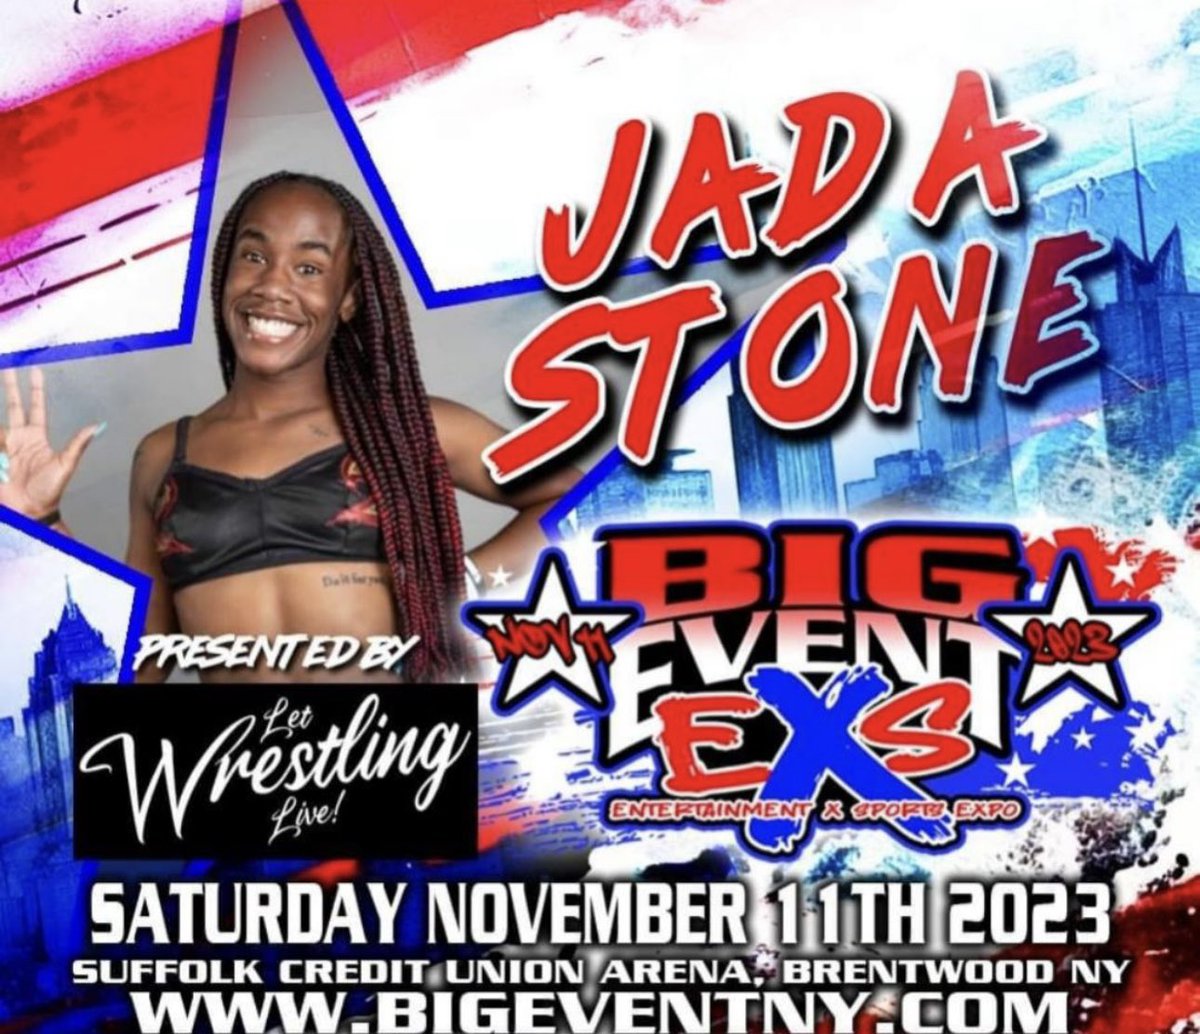 This Saturday meet @JadaStoneee at Big Event Exs in Brentwood NY! Get your tickets at bigeventny.com